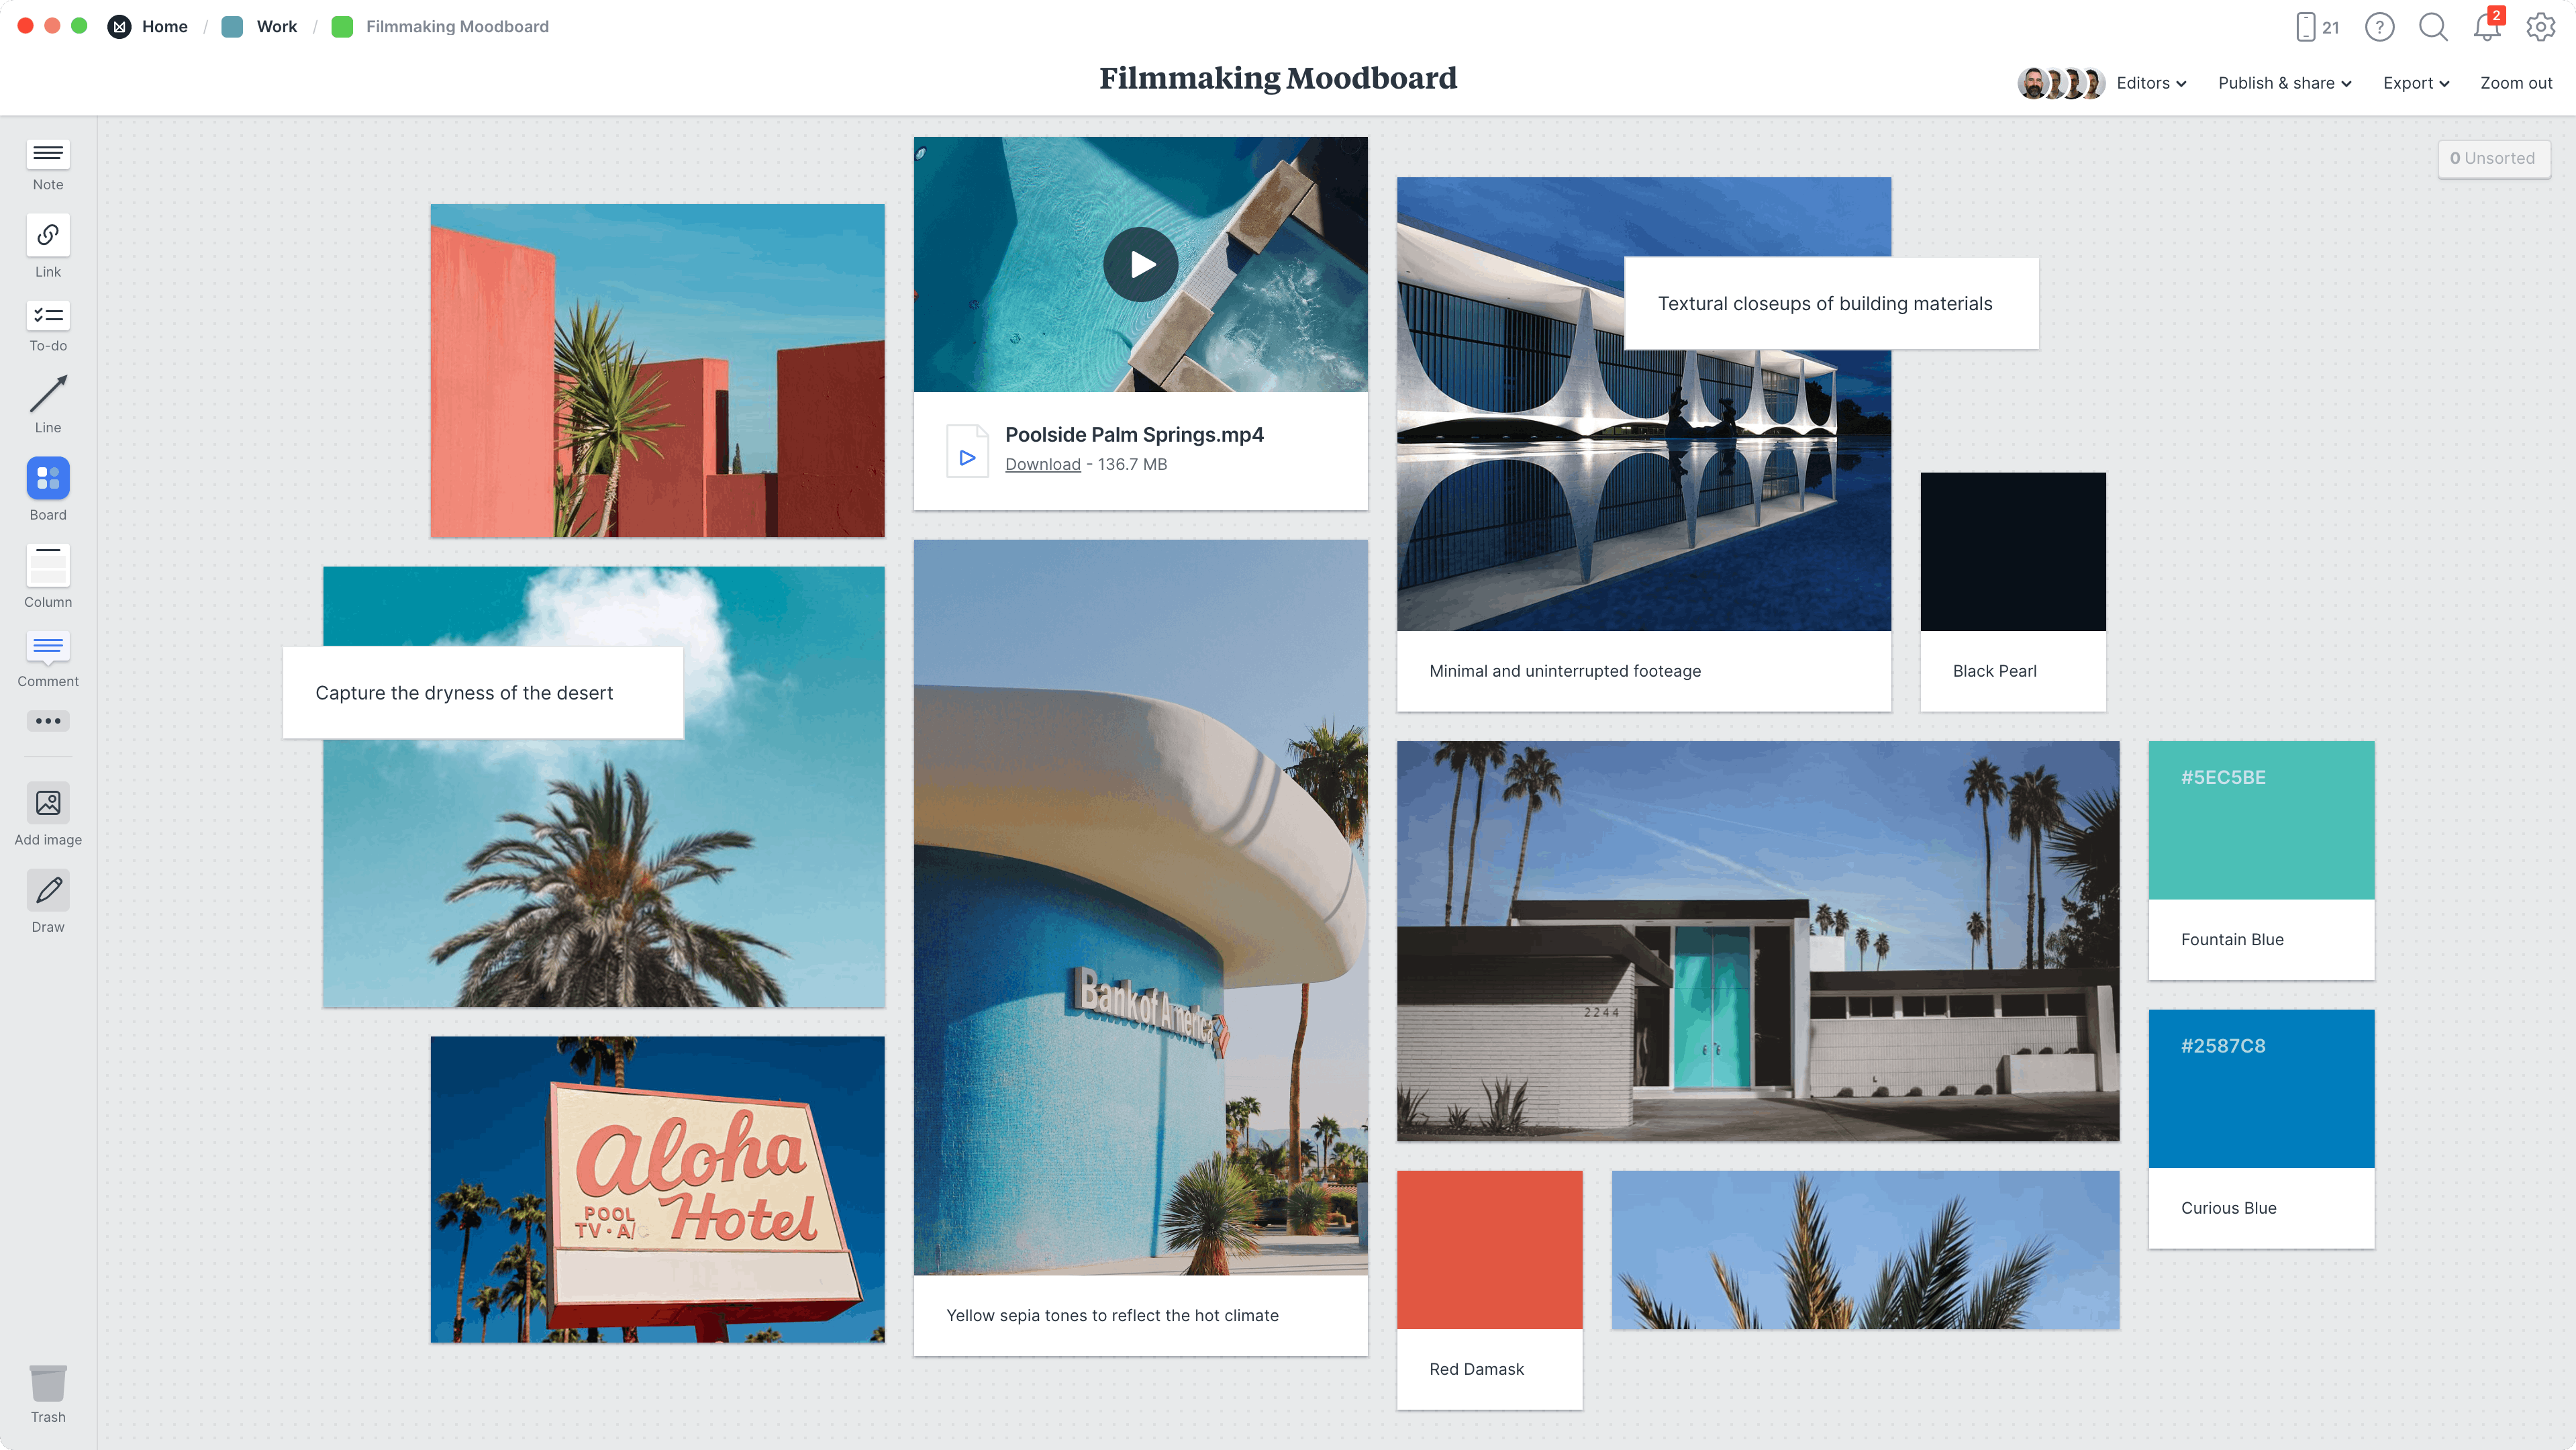 Film Moodboard Template, within the Milanote app